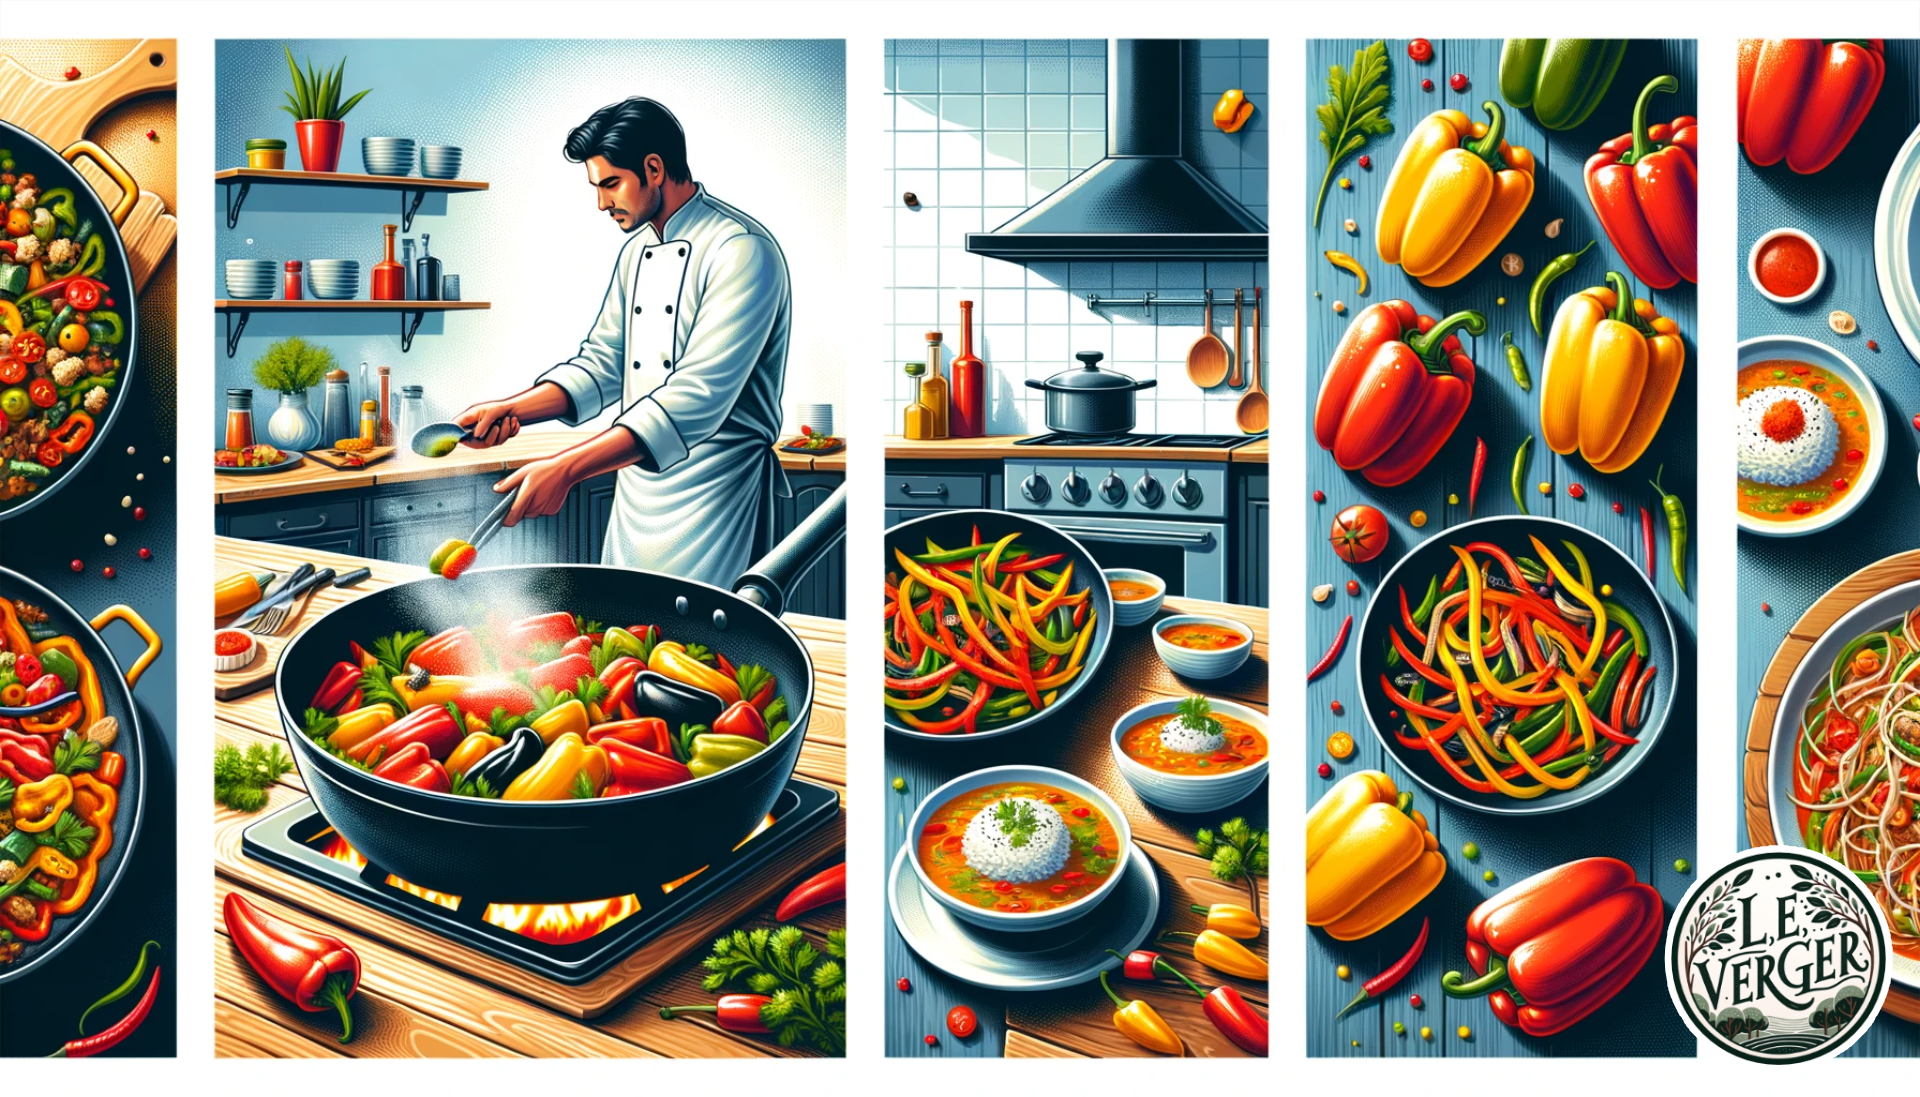 Wide illustration of a bright kitchen setting. On the left, a chef is preparing stuffed bell peppers, filling them with a mixture of rice and vegetables. The centre showcases a sizzling stir-fry pan with vibrant vegetables and thin slices of peppers, releasing steam. On the right, a table set with various pepper-based dishes, from spicy soups to grilled peppers, highlighting the culinary diversity of using peppers.